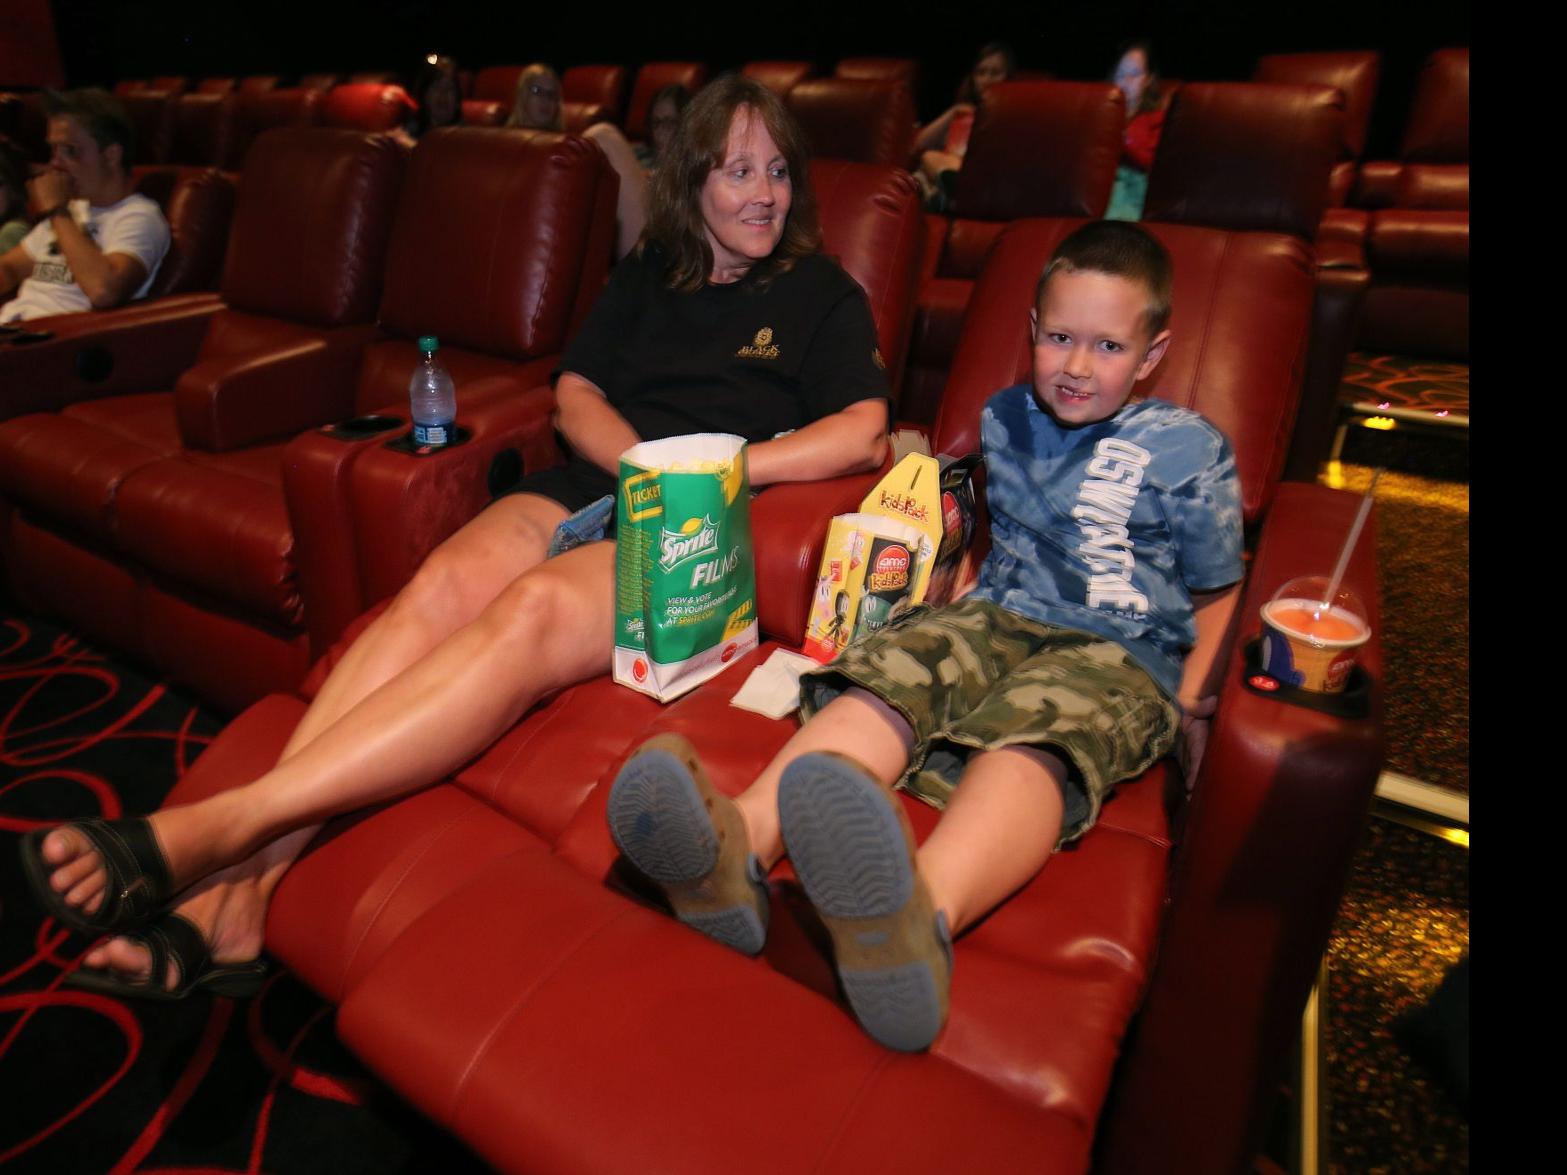 Amcs Comfort Revolution Brings Red Leather Recliners To Compete With Your Living Room Movie Experience Local News Buffalonewscom